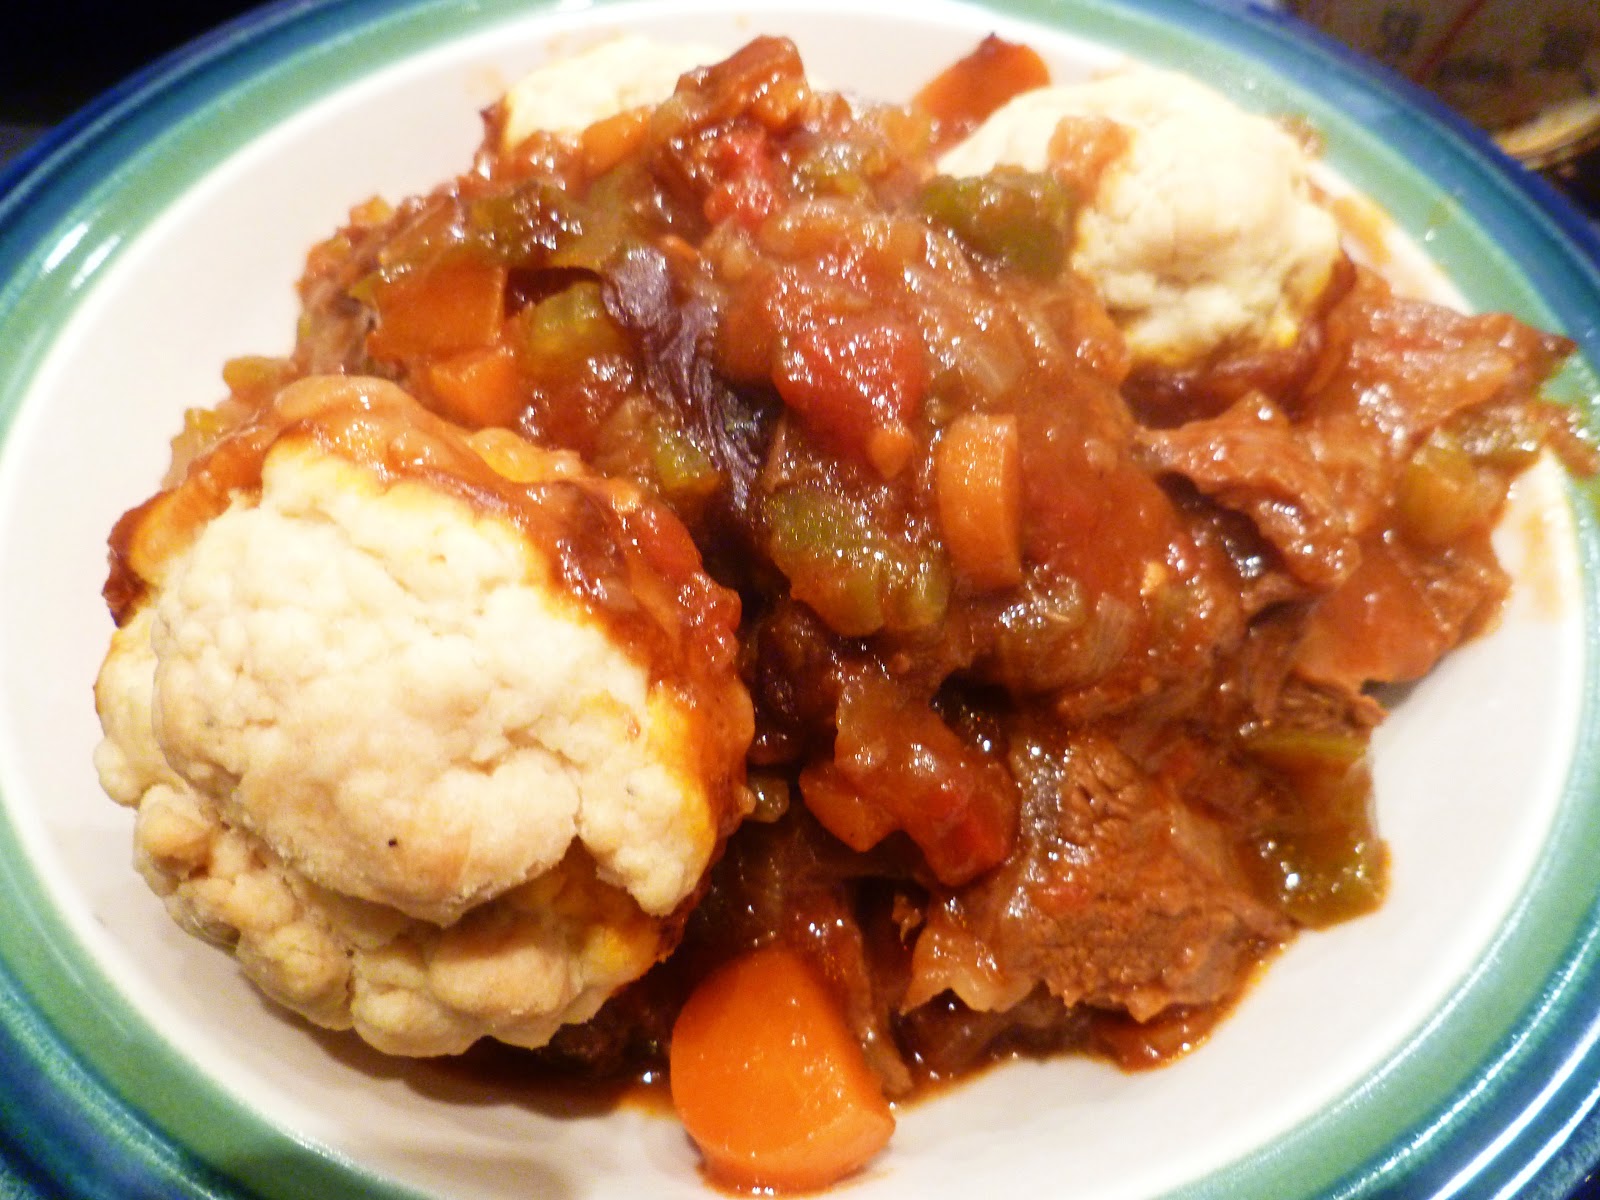 beef and ale stew